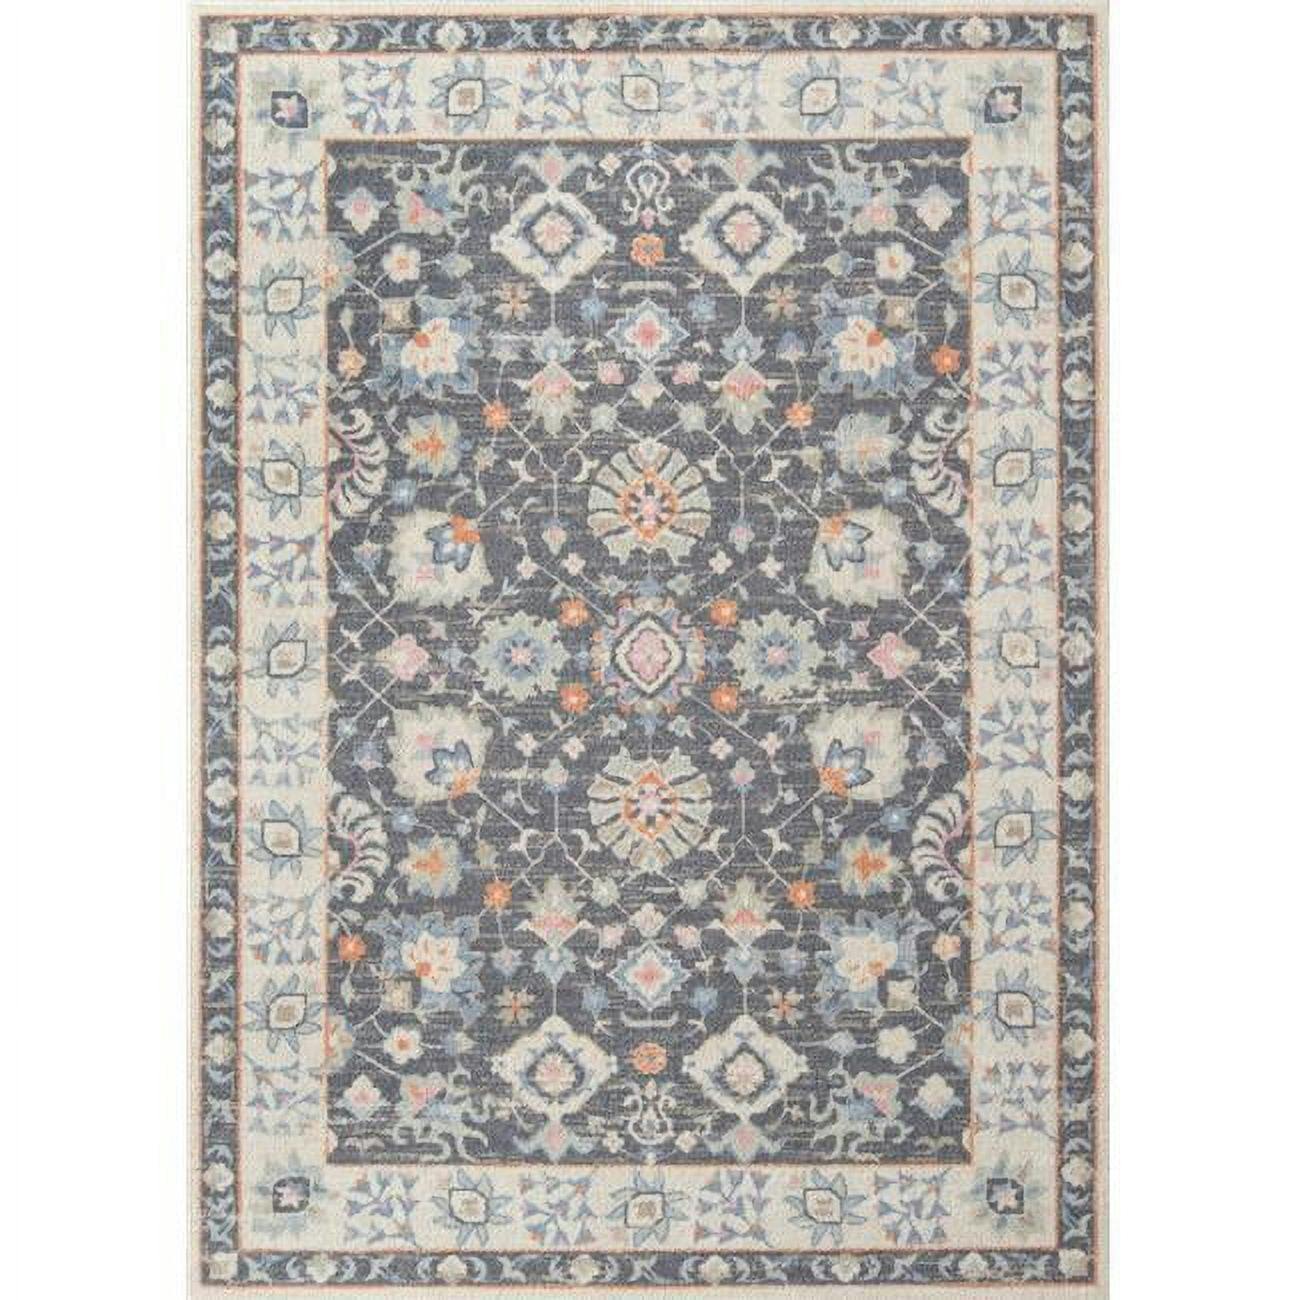 Anatolia Charcoal Medallion 6'6" x 9' Wool-Synthetic Blend Rug